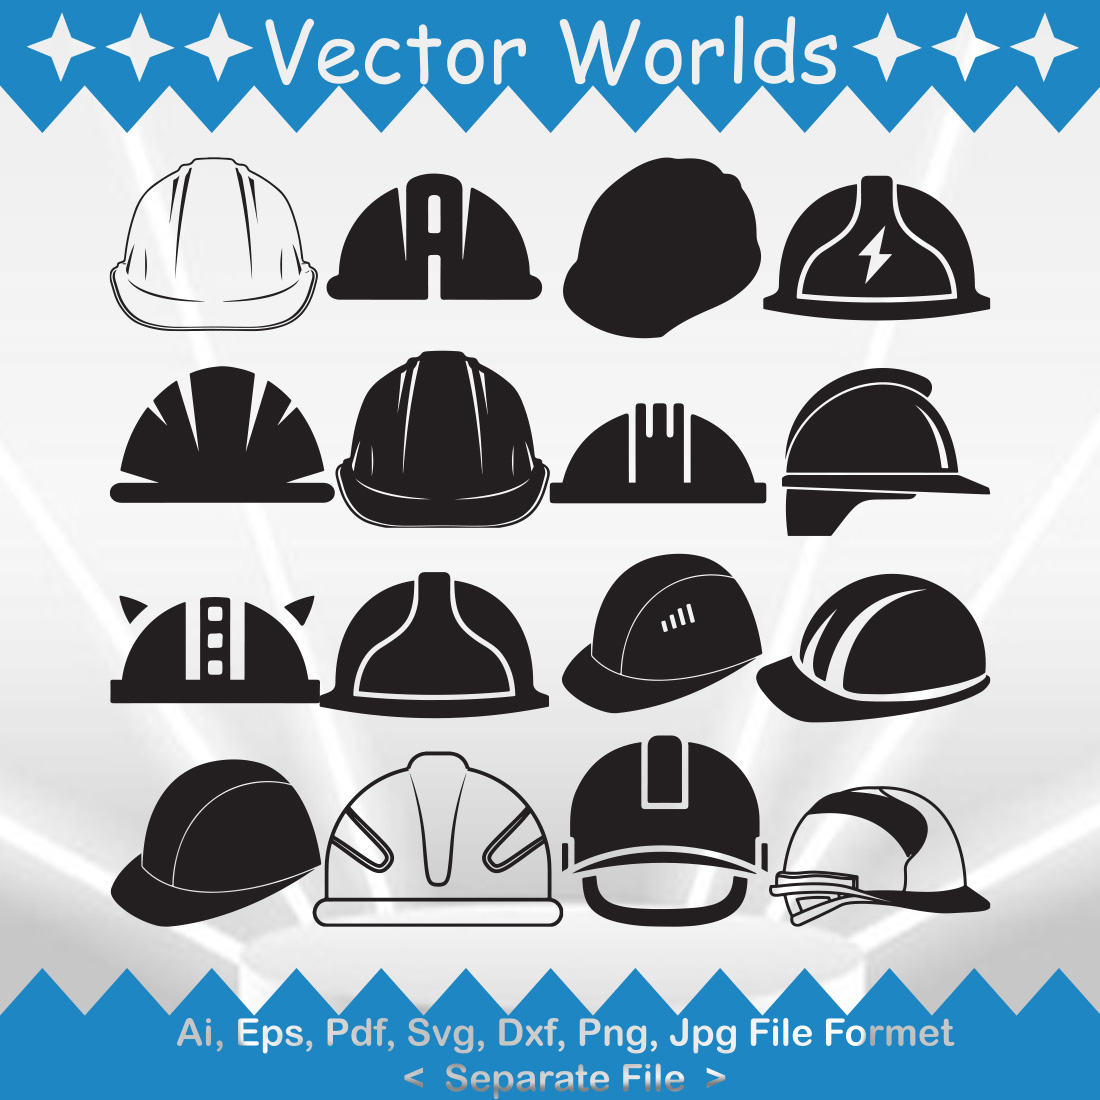 Pack of vector adorable images of hard hat silhouettes.